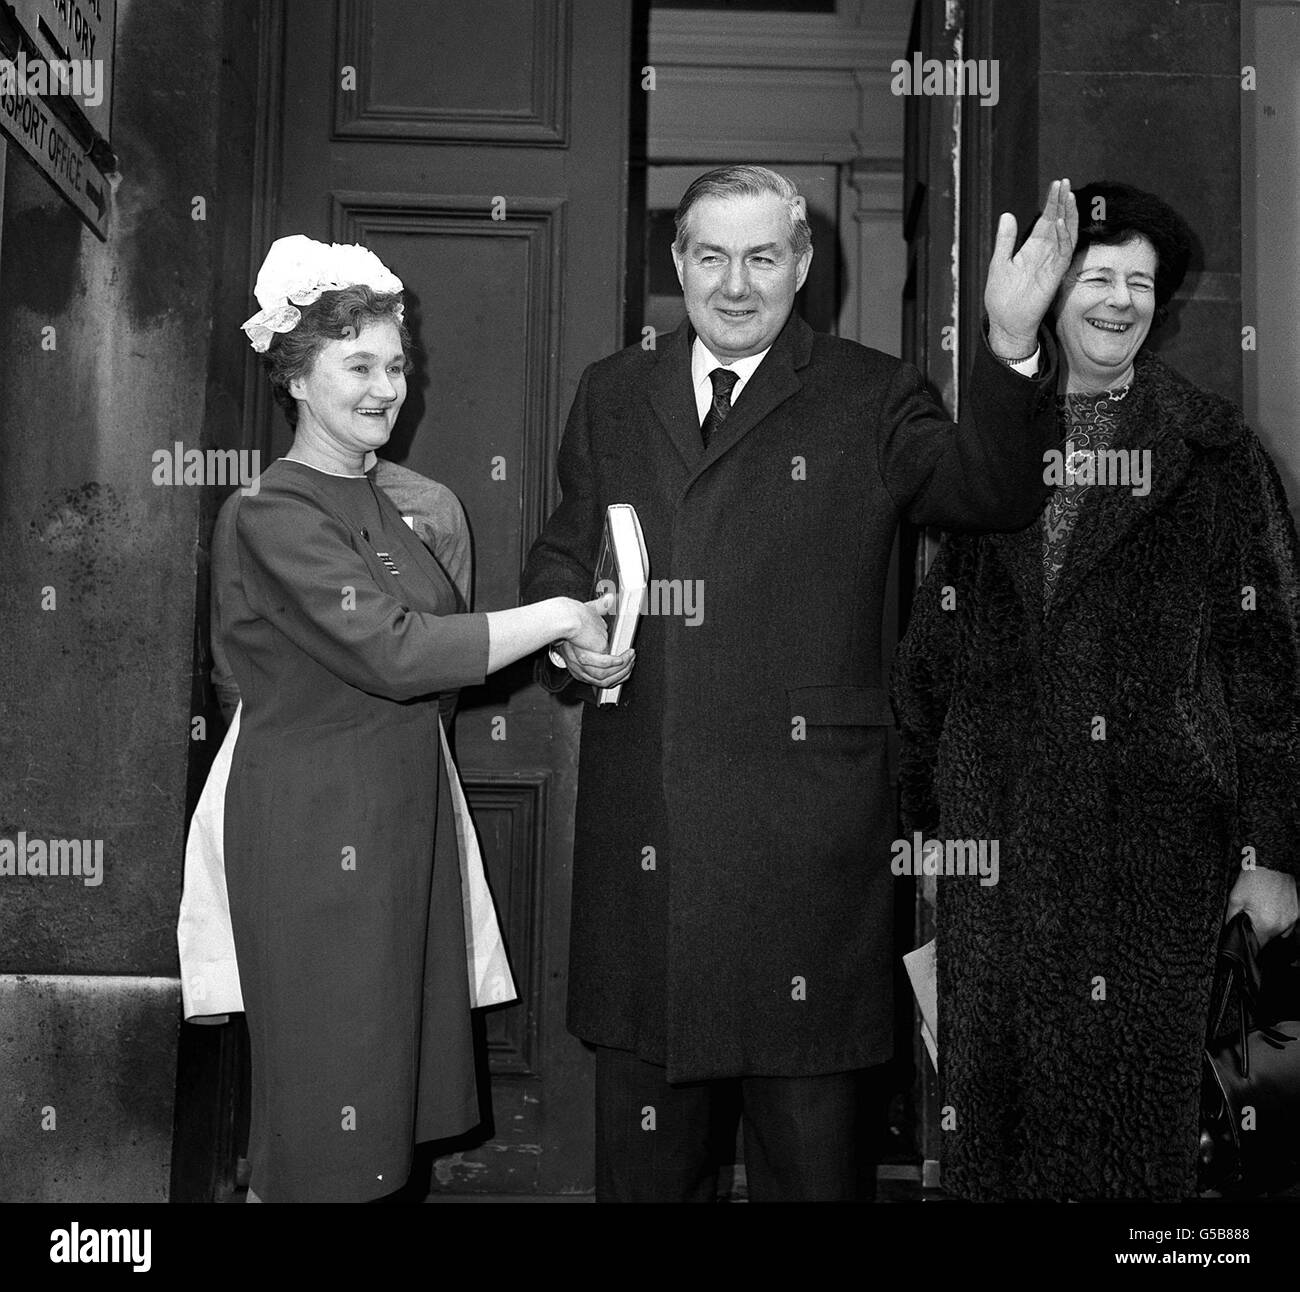 Mr James Callaghan, shadow employment secretary, says goodbye to the matron, Miss DM Vinall, as accompanied by his wife, he leaves Lambeth Hospital after a prostate gland operation. Stock Photo